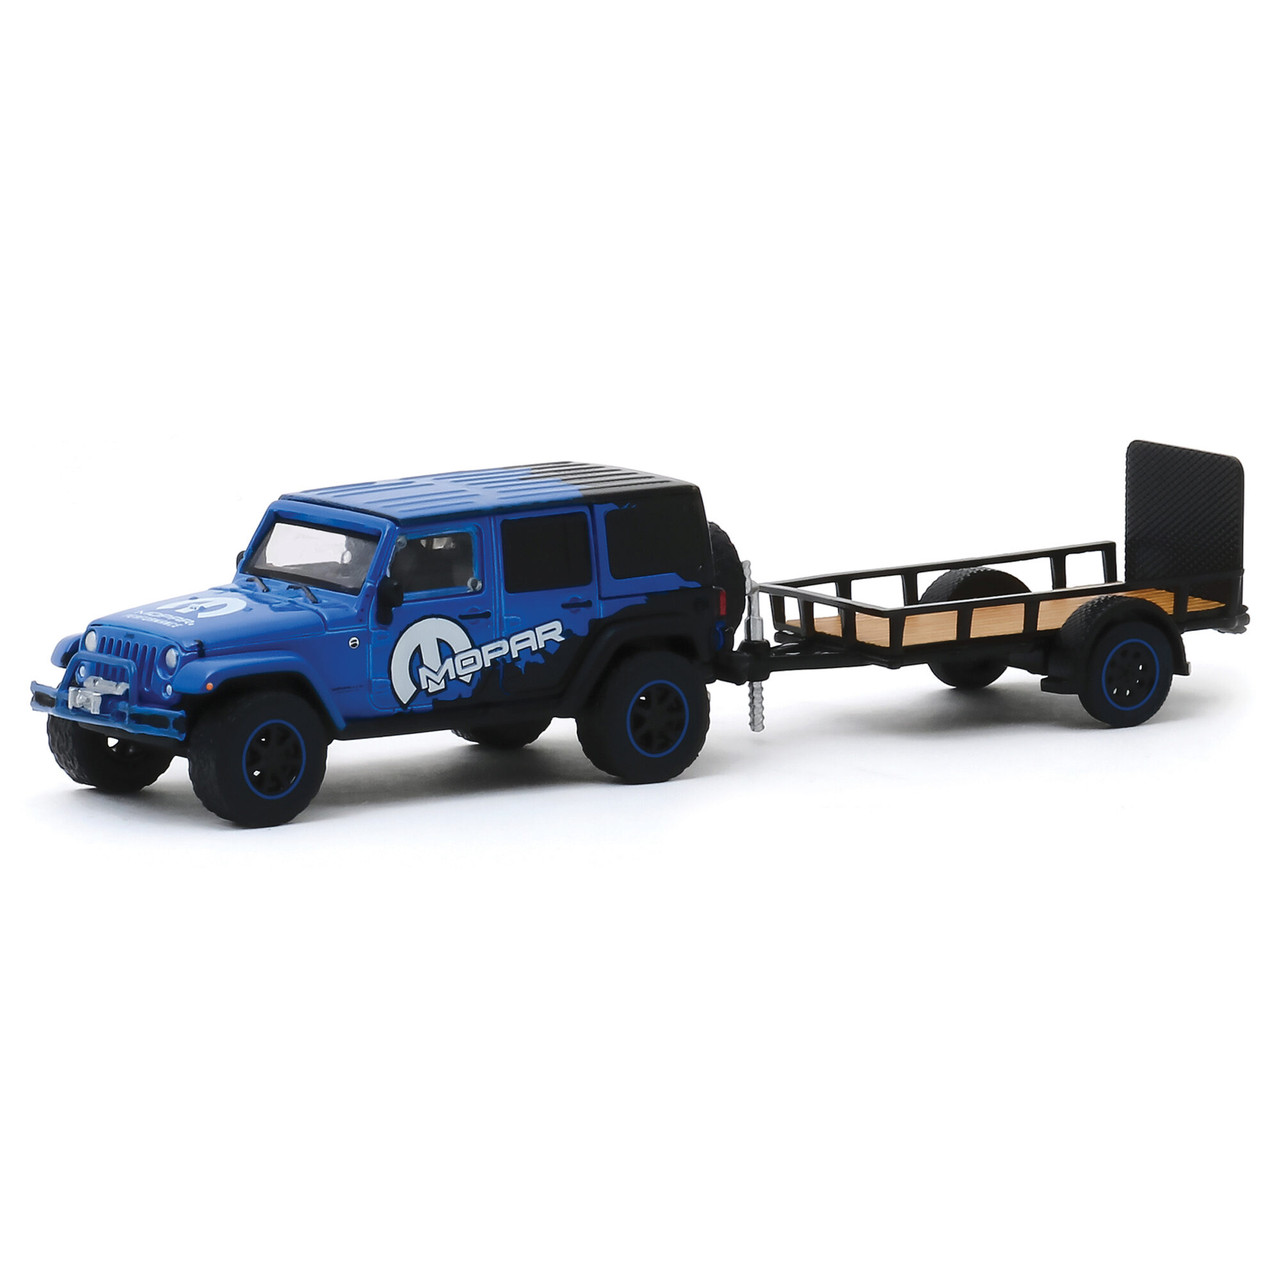 2012 Jeep MOPAR Wrangler Unlimited & Utility Trailer 1:64 Scale Diecast  Model by Greenlight | Collectable Diecast